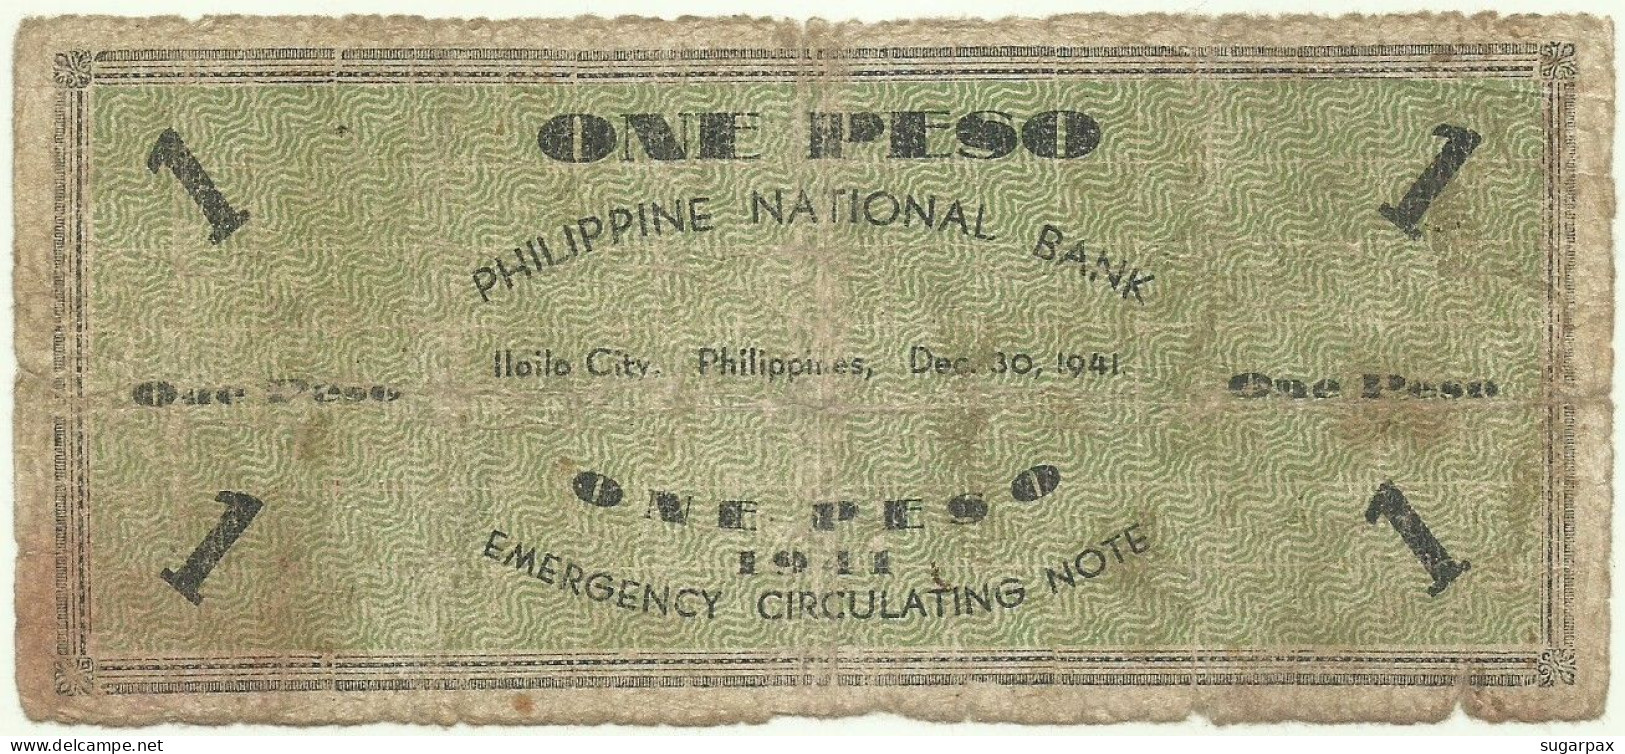 PHILIPPINES - 1 Peso - 1941 - Pick S 305 - Serie A6 - ILOILO Currency Committee - Filipinas